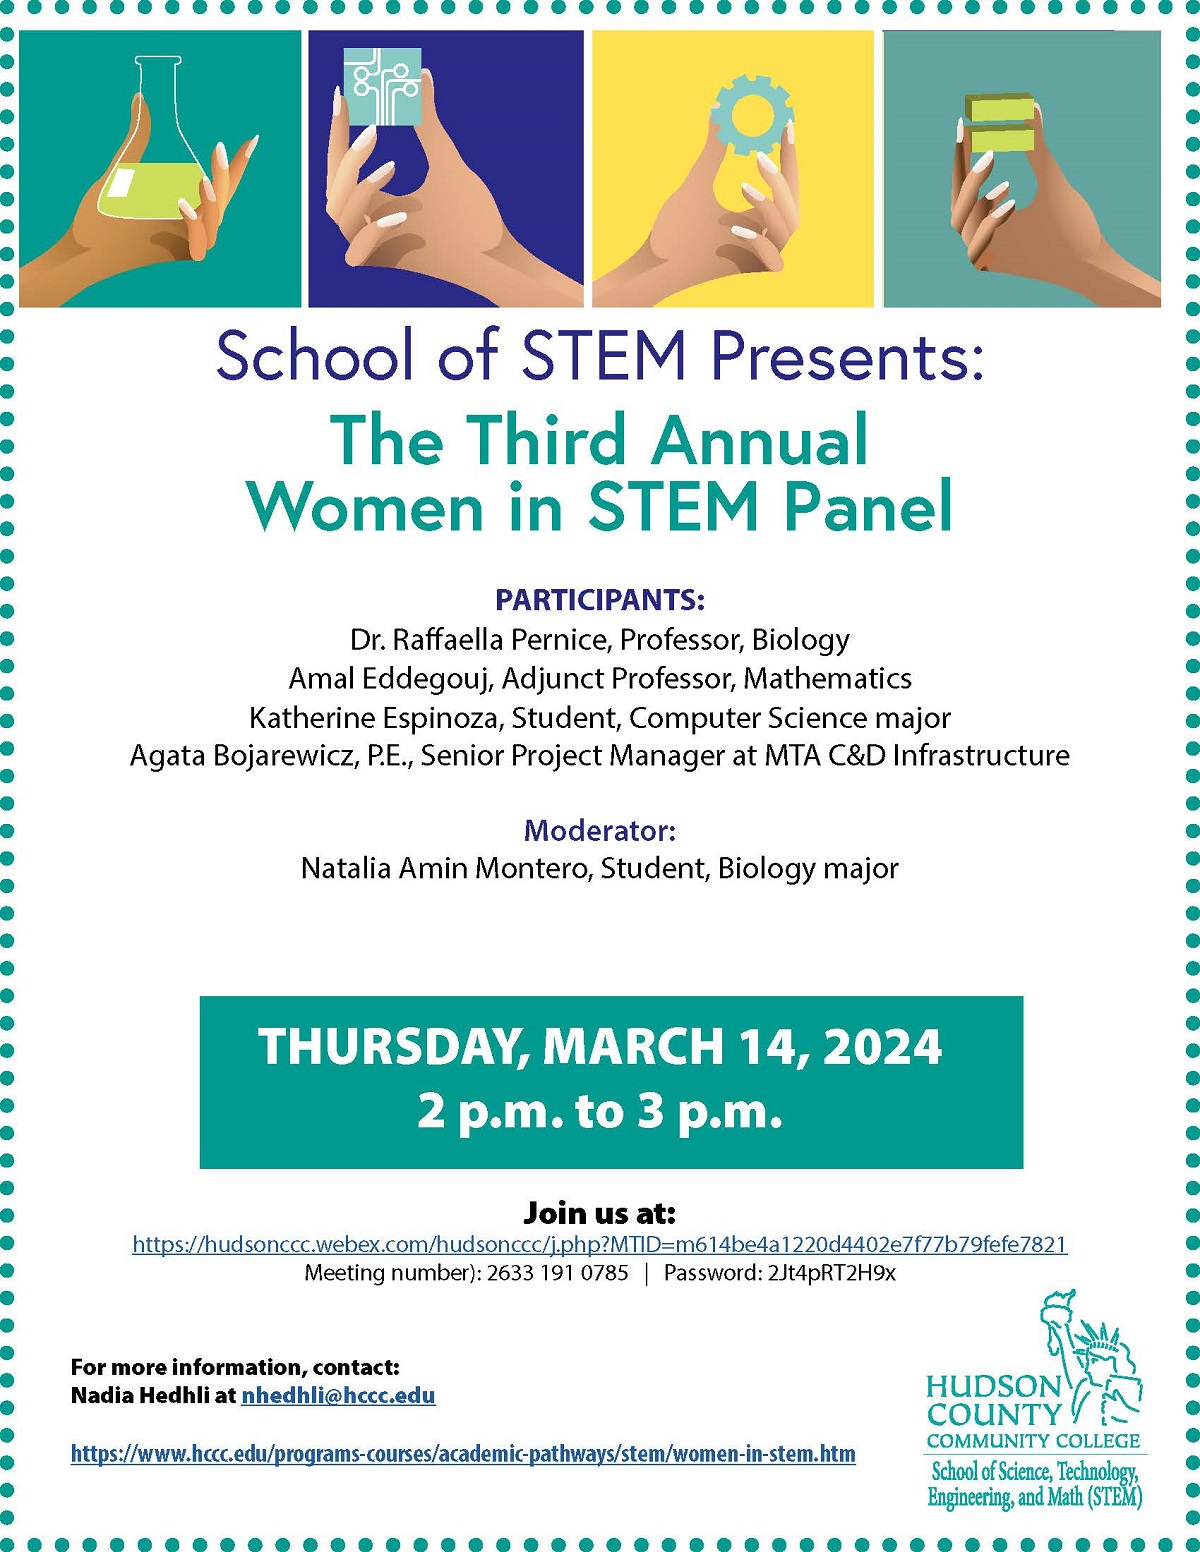 The Third Annual Women in STEM Panel